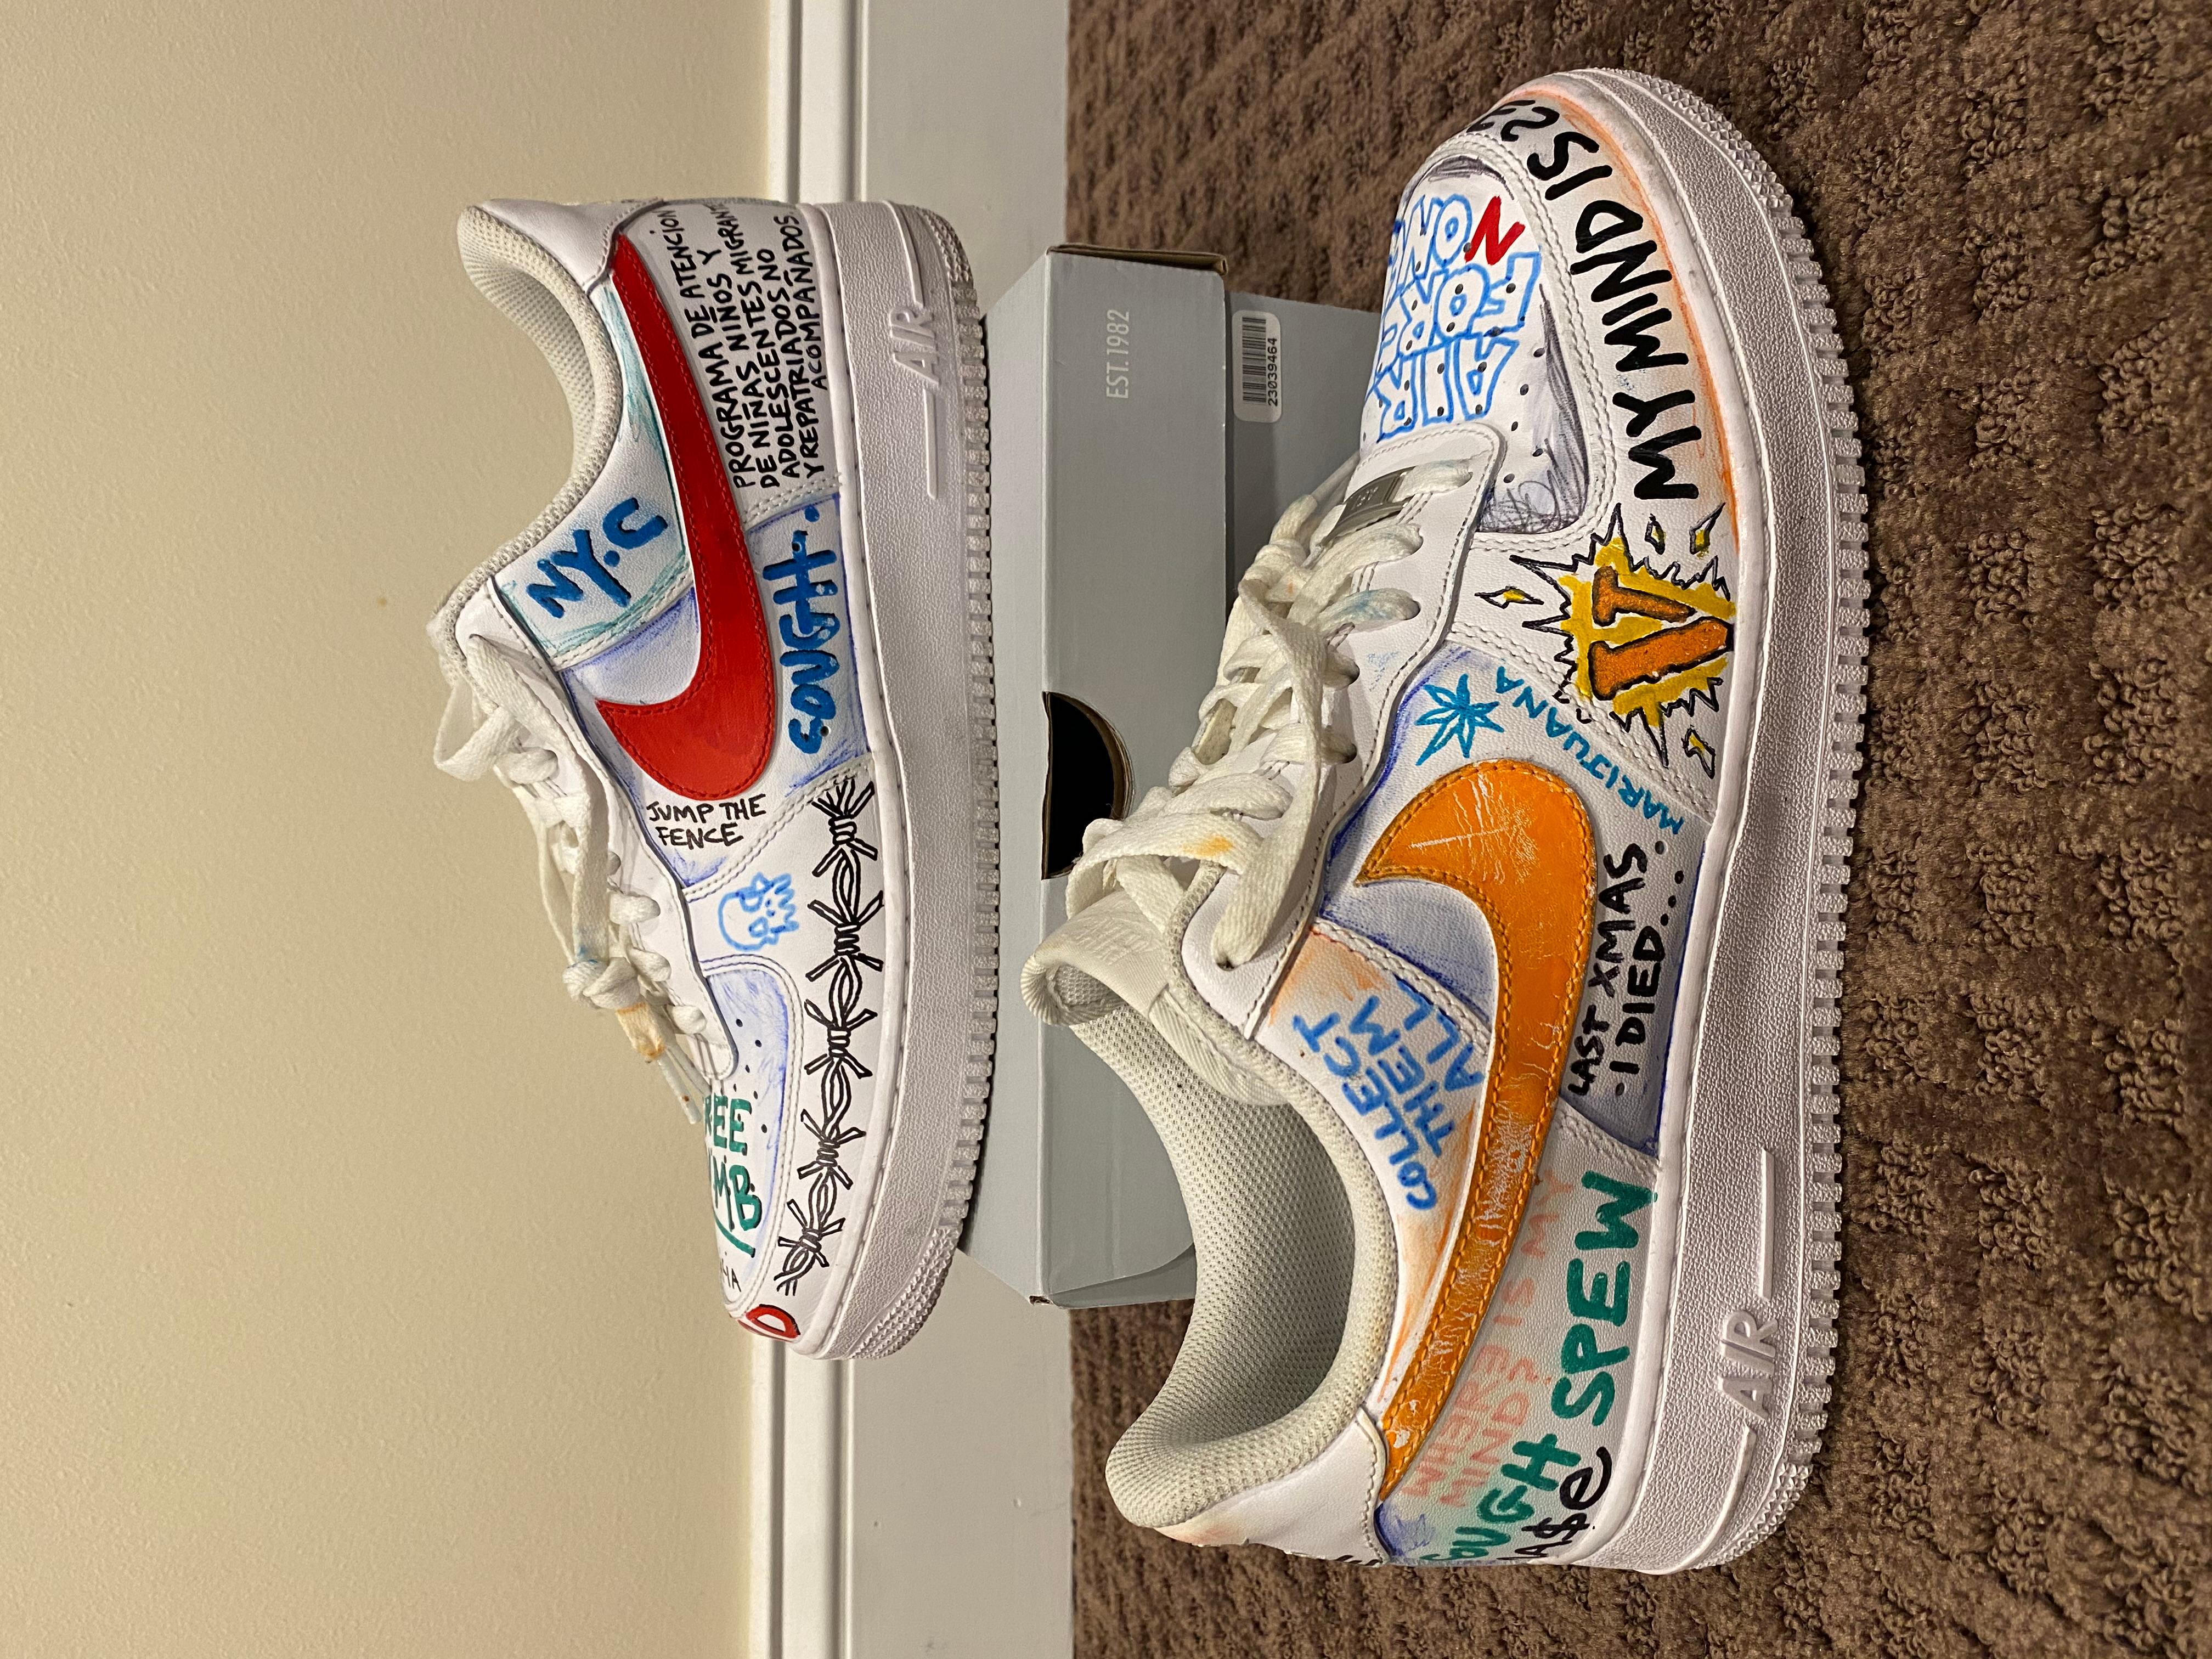 Vlone x Pauly x Nike Air force 1 low “Mase”
Size 10
No OG box from the release, however will be sent with a replacement AF1 box
The shoe is in good overall condition; just the art work is starting to fade in some areas. Please see ALL DETAILED